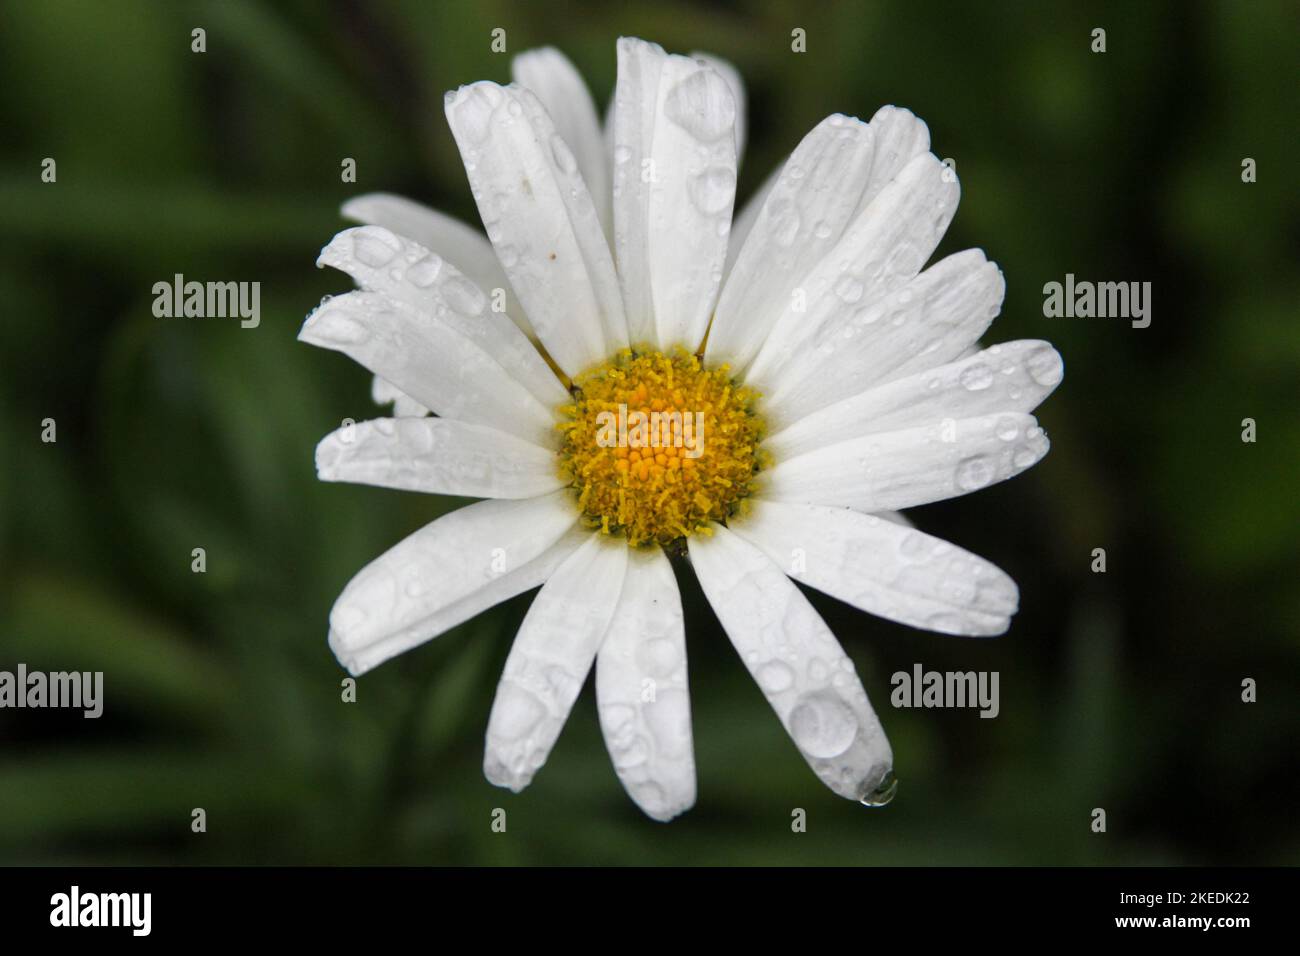 A close-up of a daisy (Bellis perennis). Stock Photo